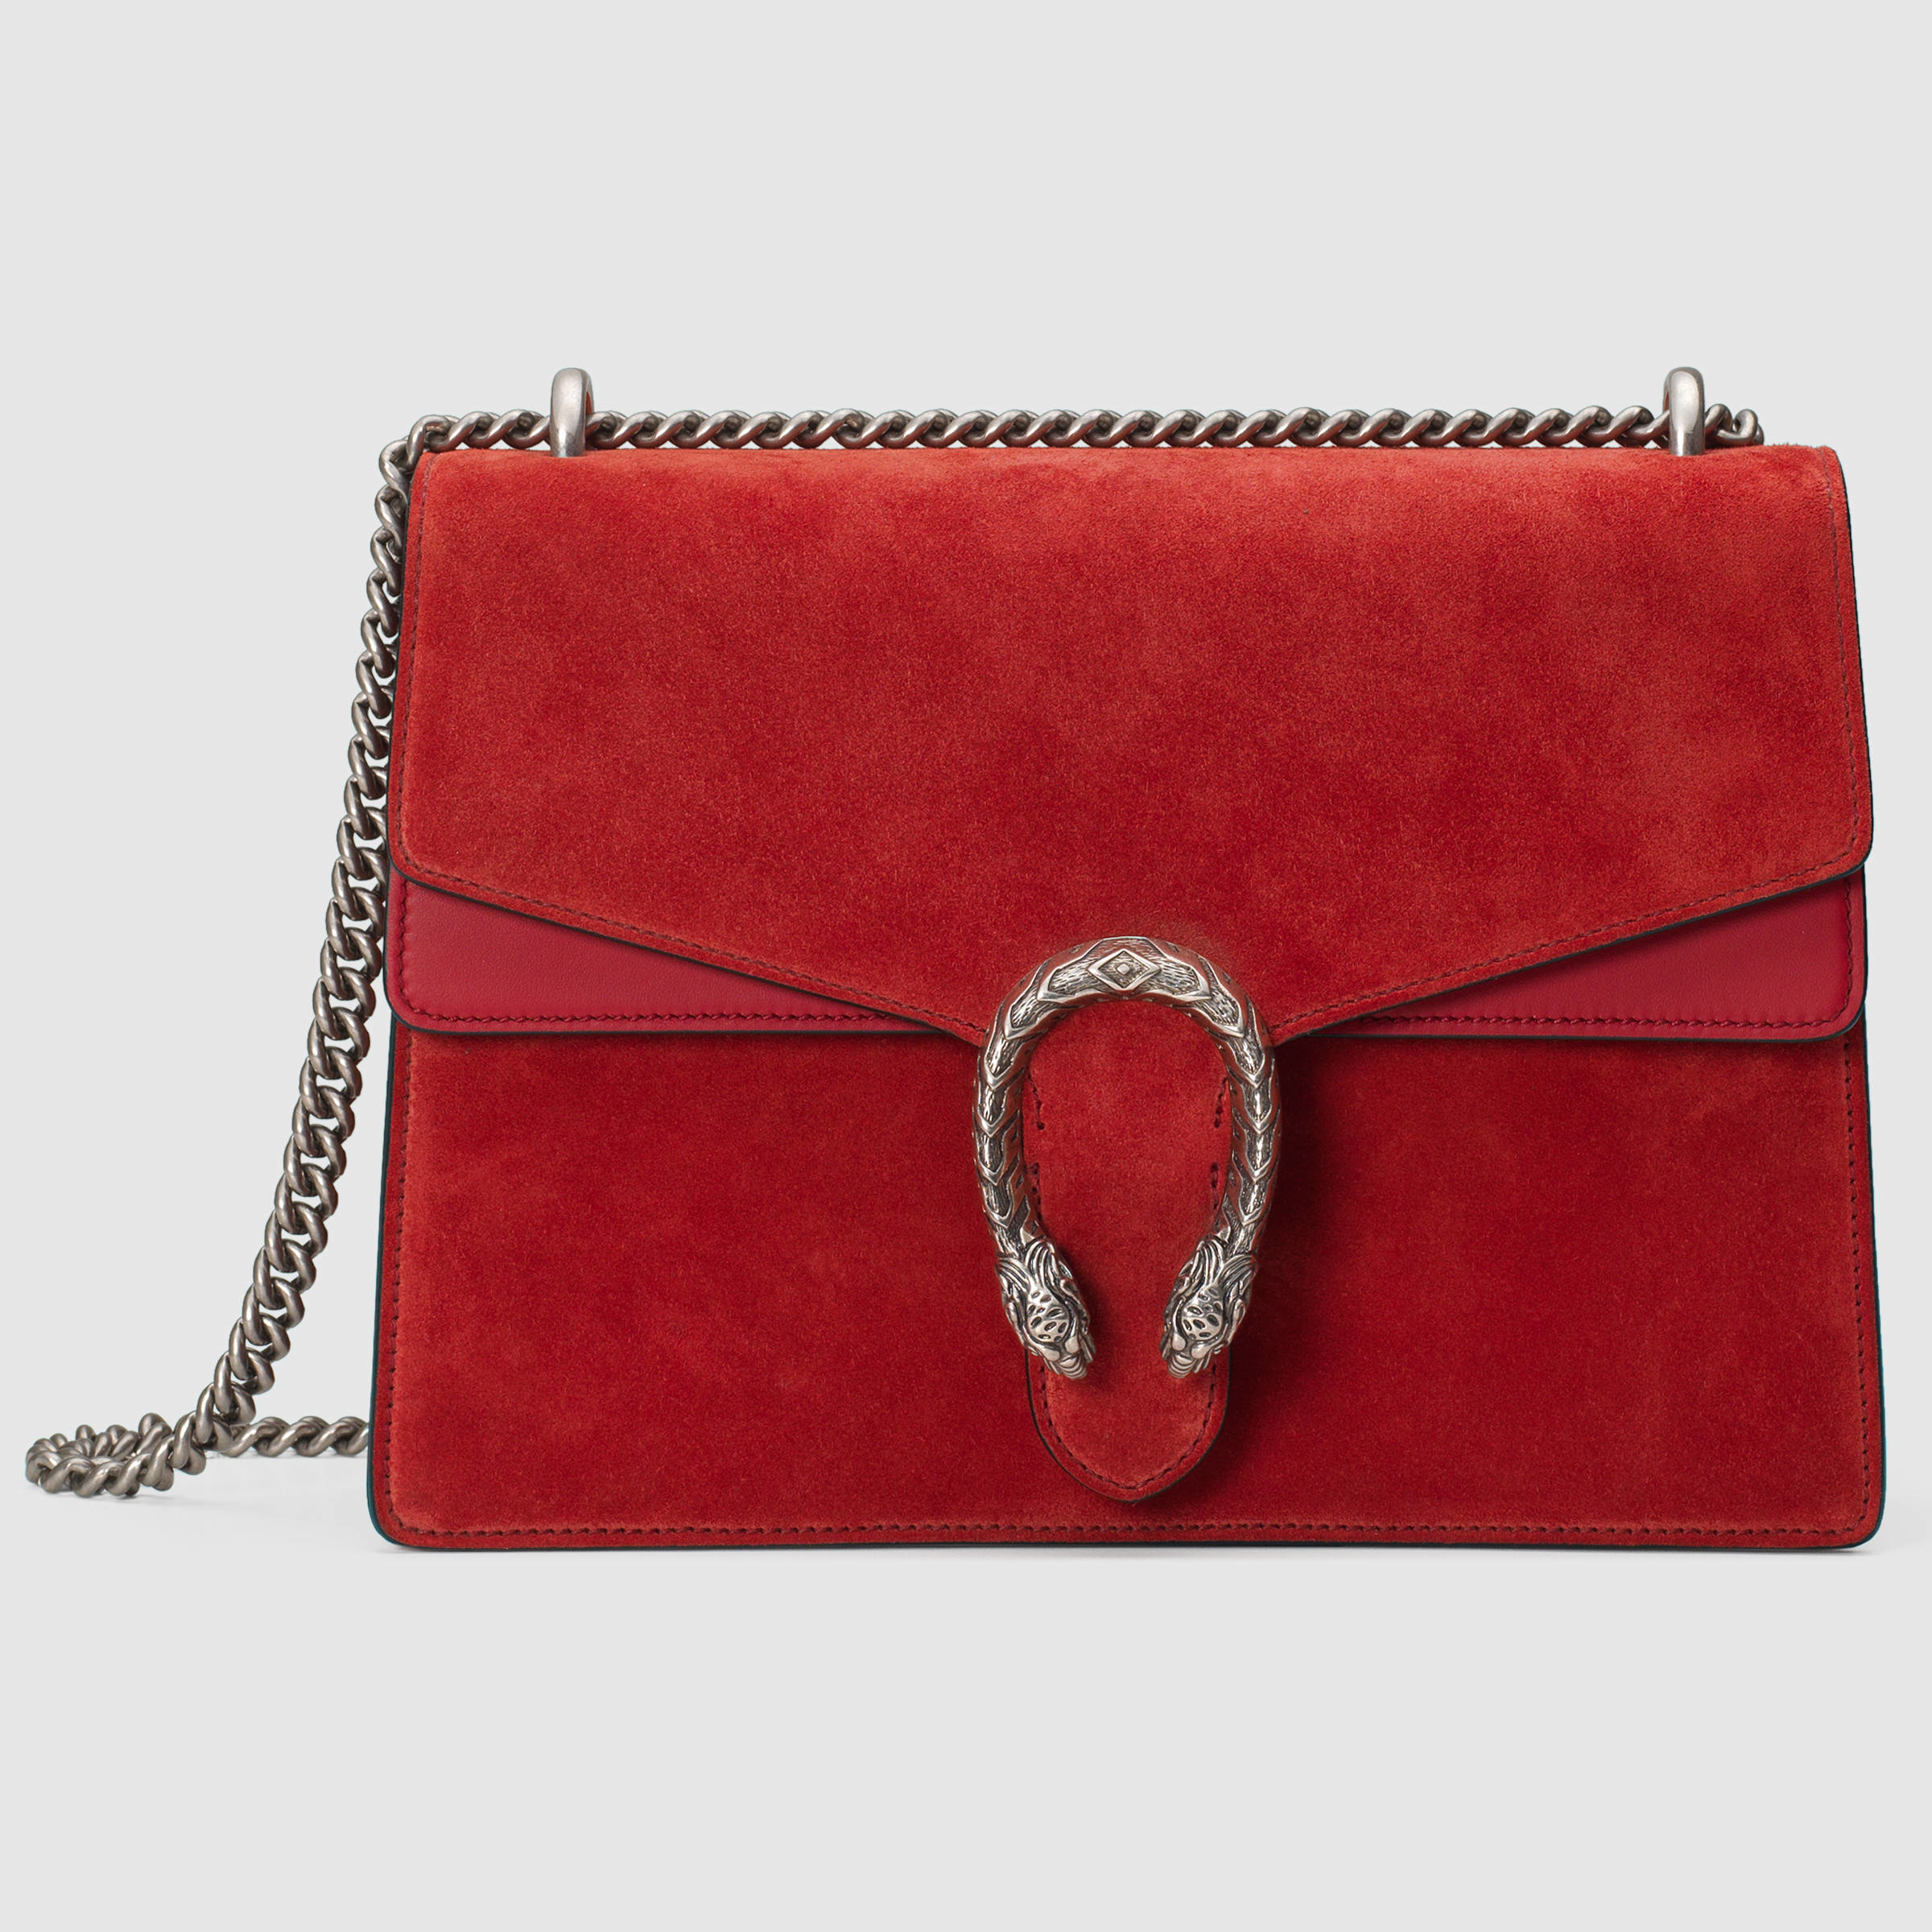 gucci red suede bag